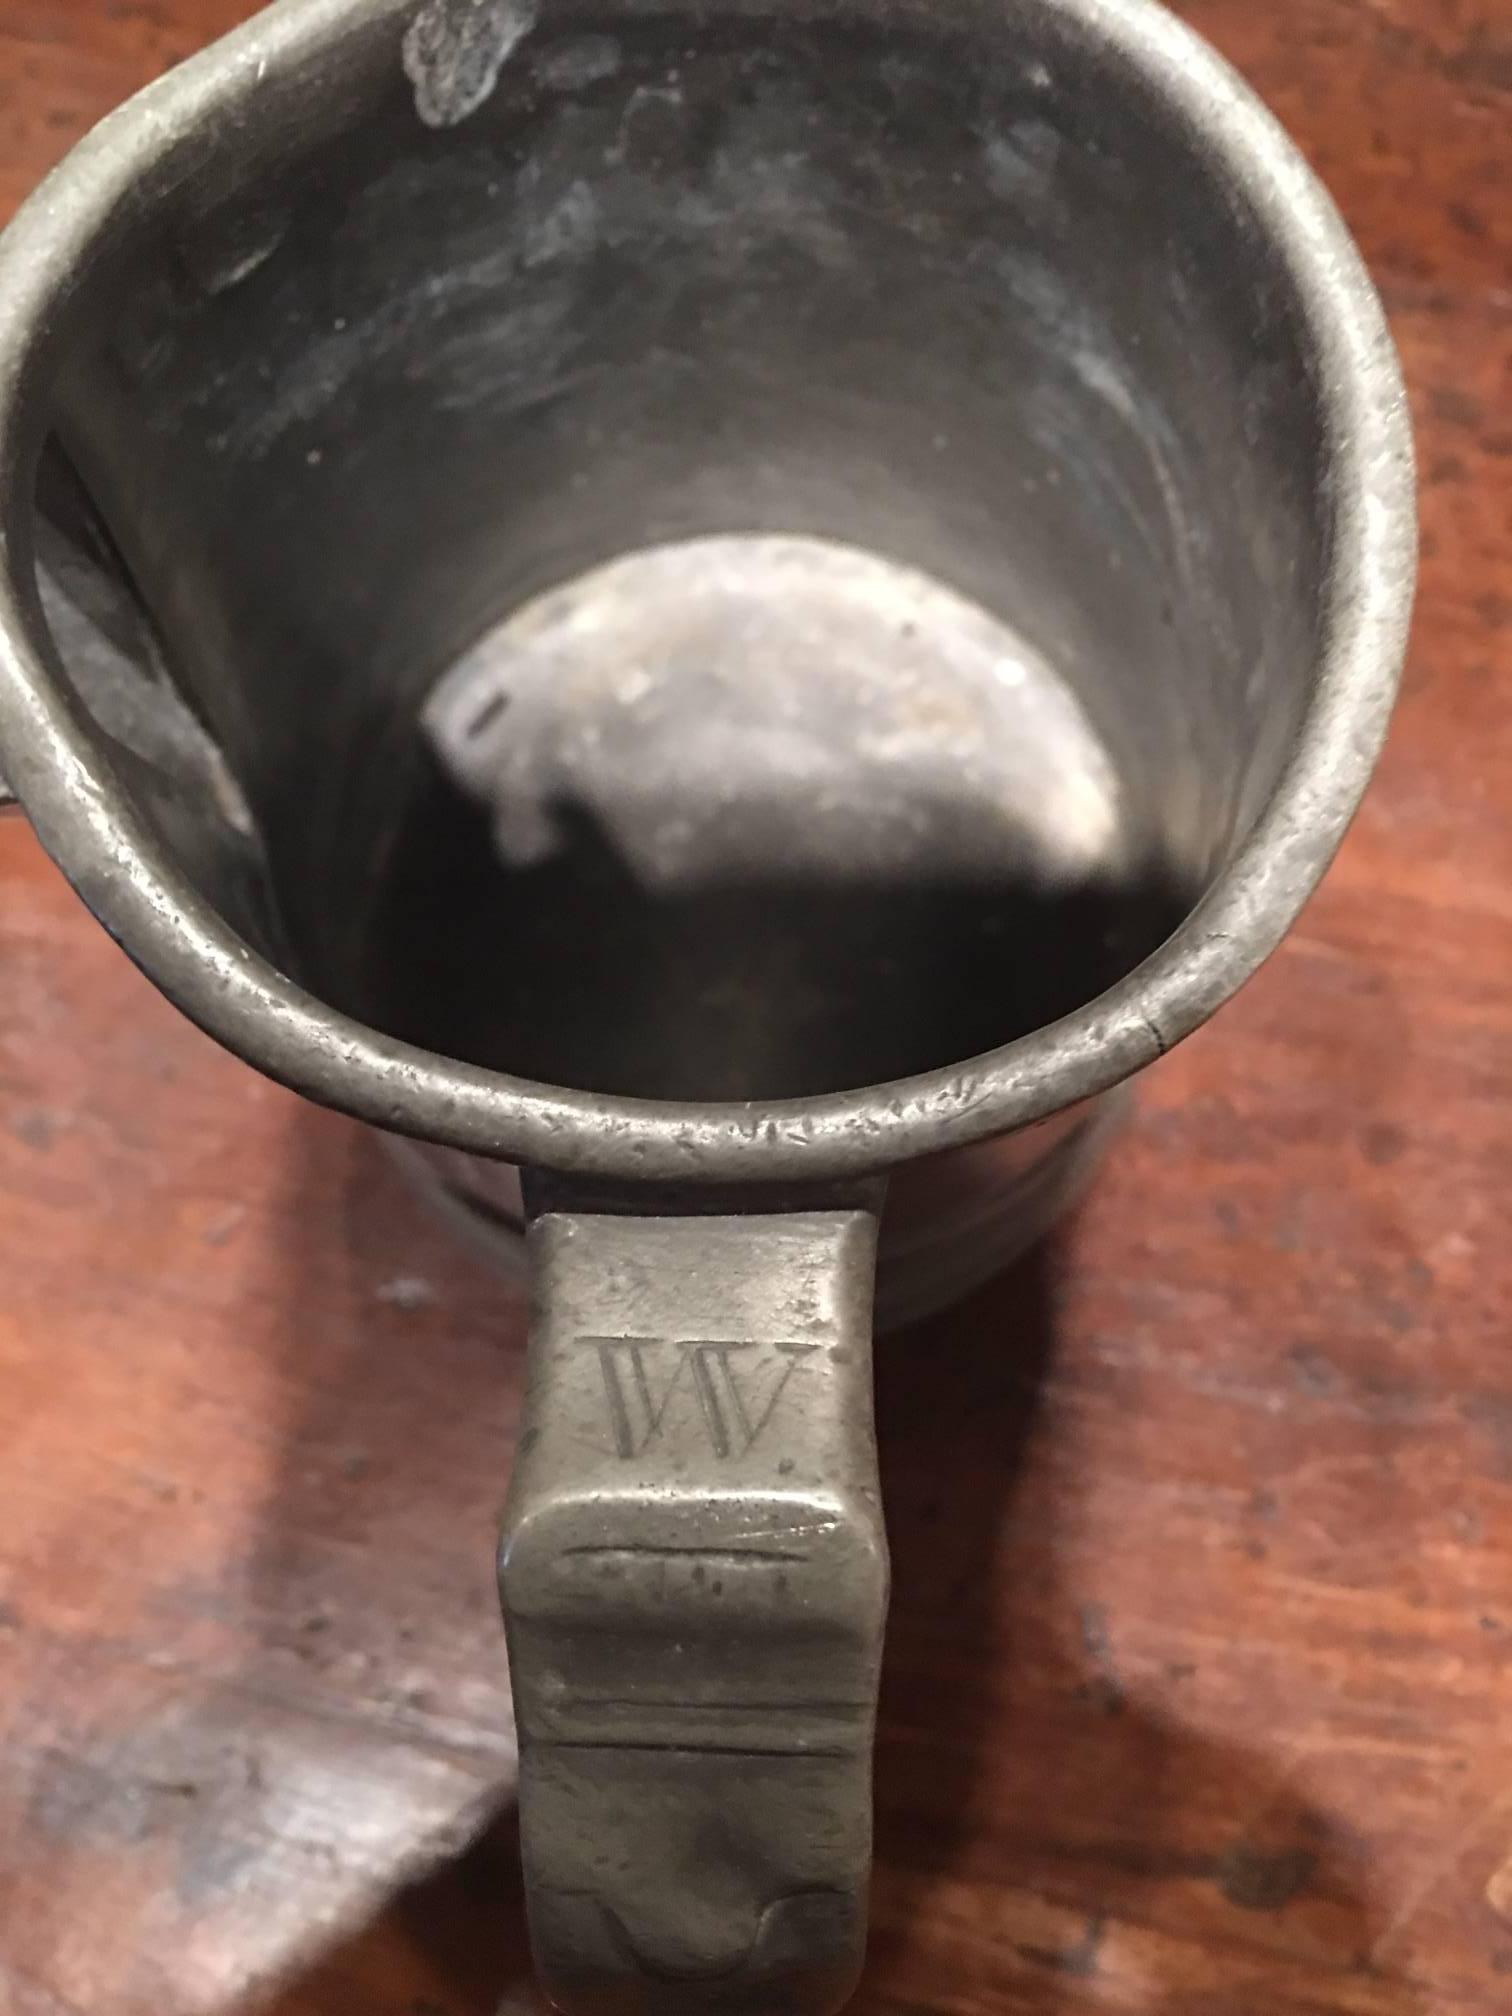 18th century English pewter mug or cup with handle. Measures: 5.5